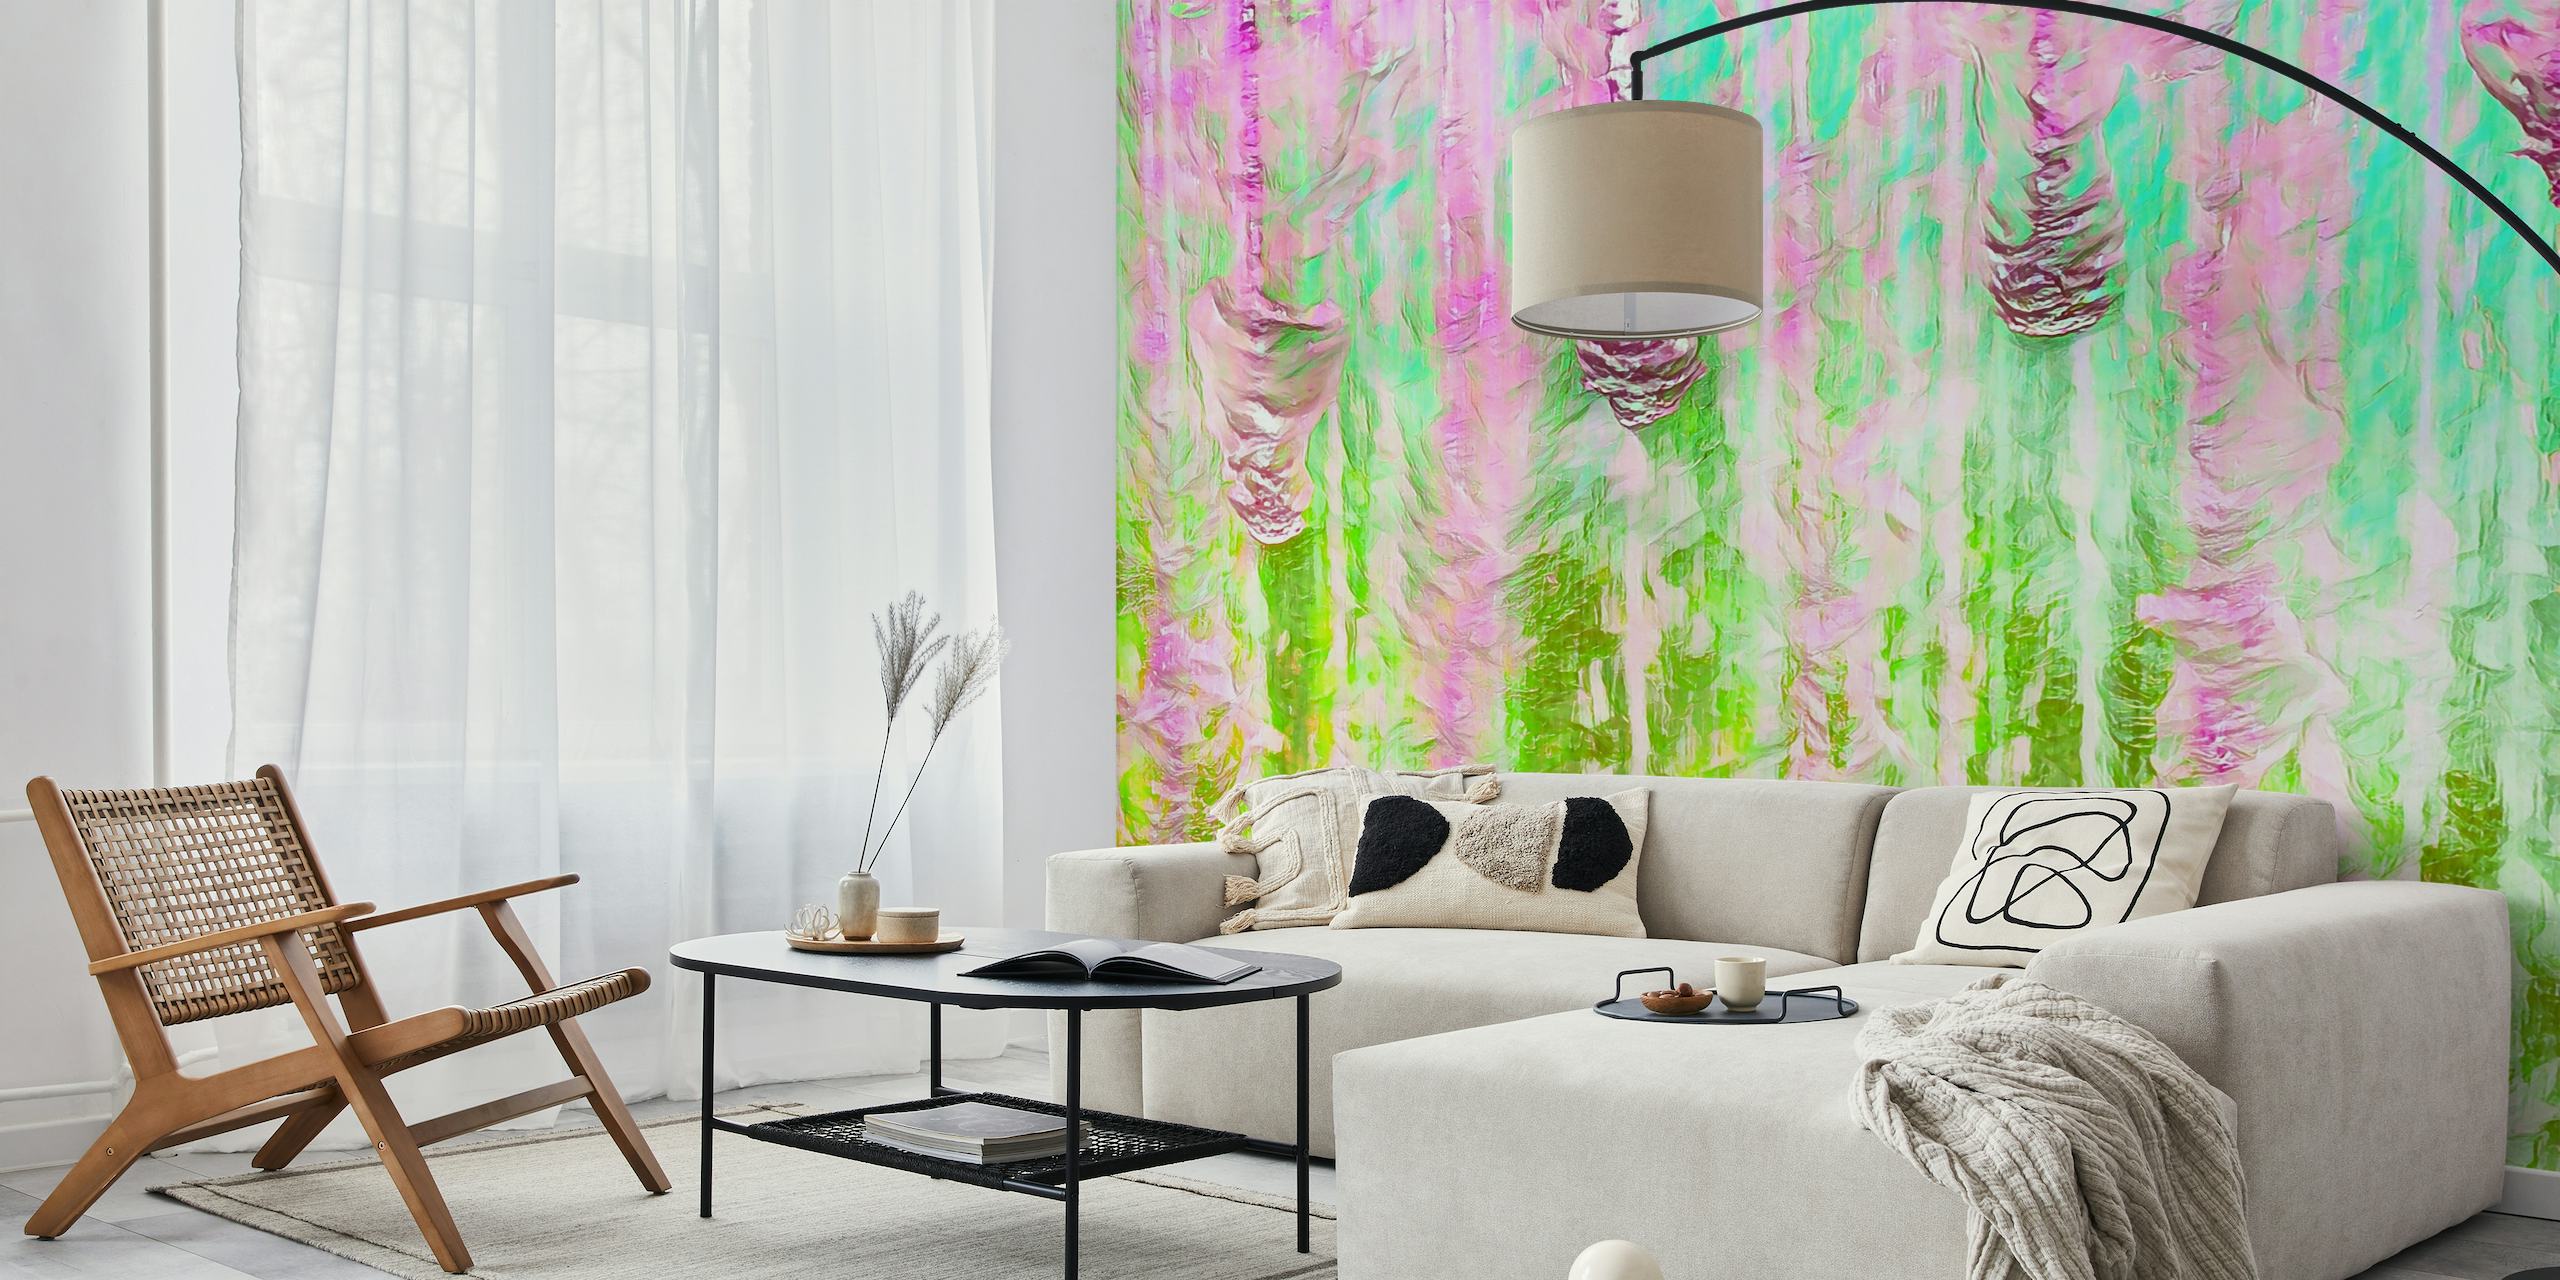 Colorful abstract Happy Liquid Paint Flow wall mural with vibrant pinks and greens, creating a flowing watercolor effect.